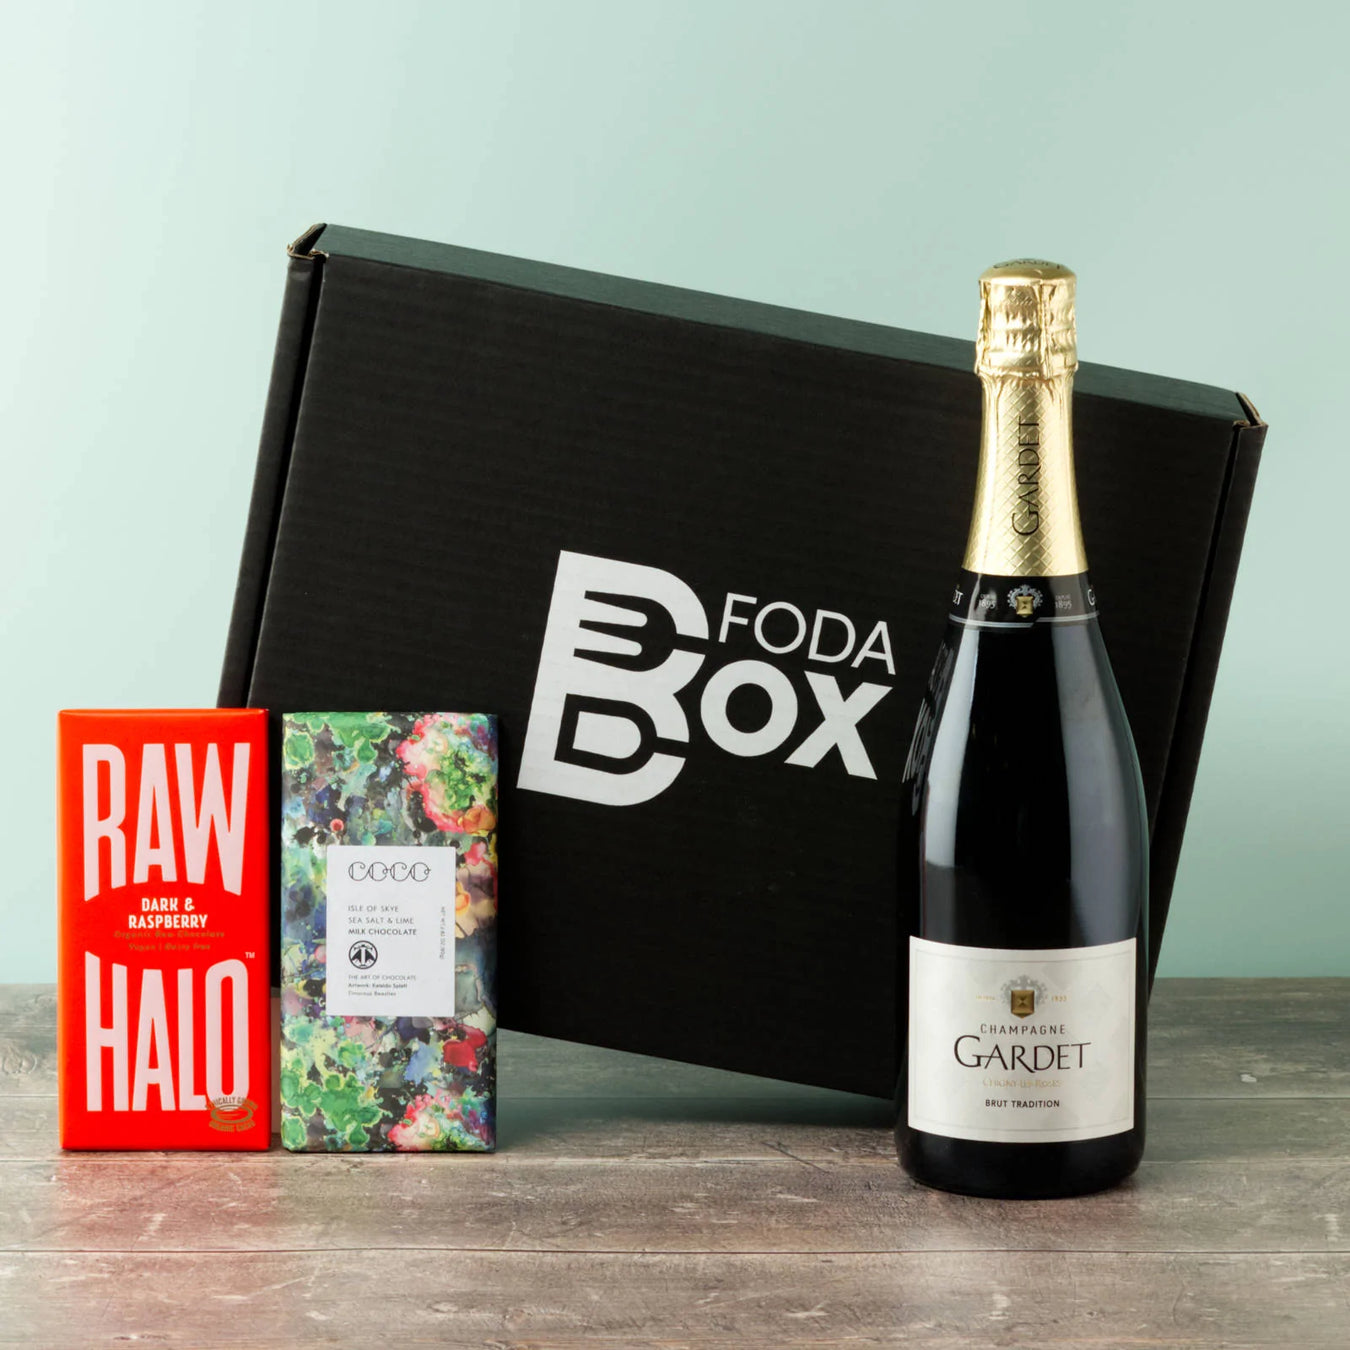 Champagne and chocolate gift with FodaBox branded box for client and staff gifts